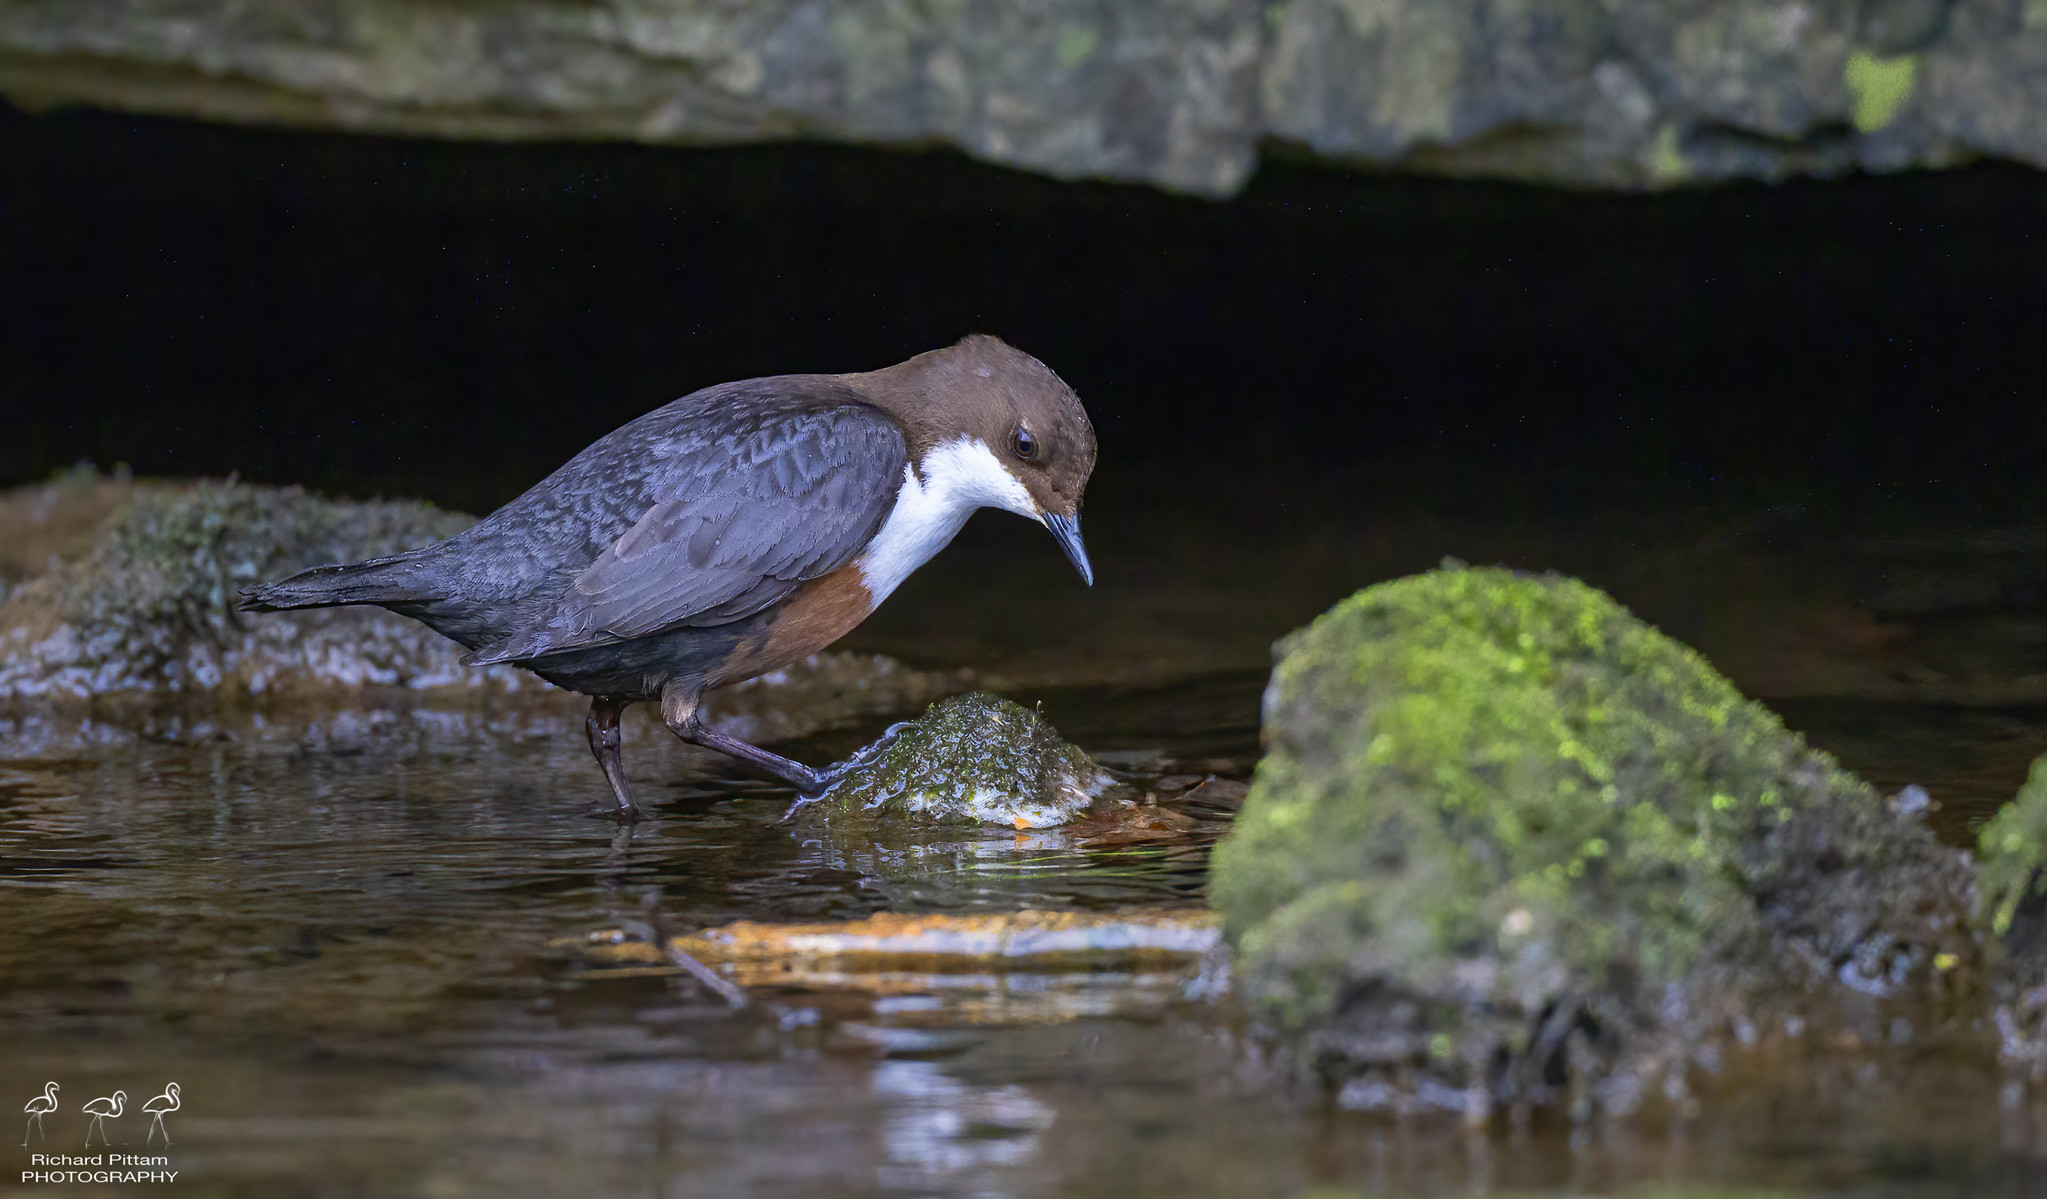 Dipper - difficult to meter against a black cave entrance